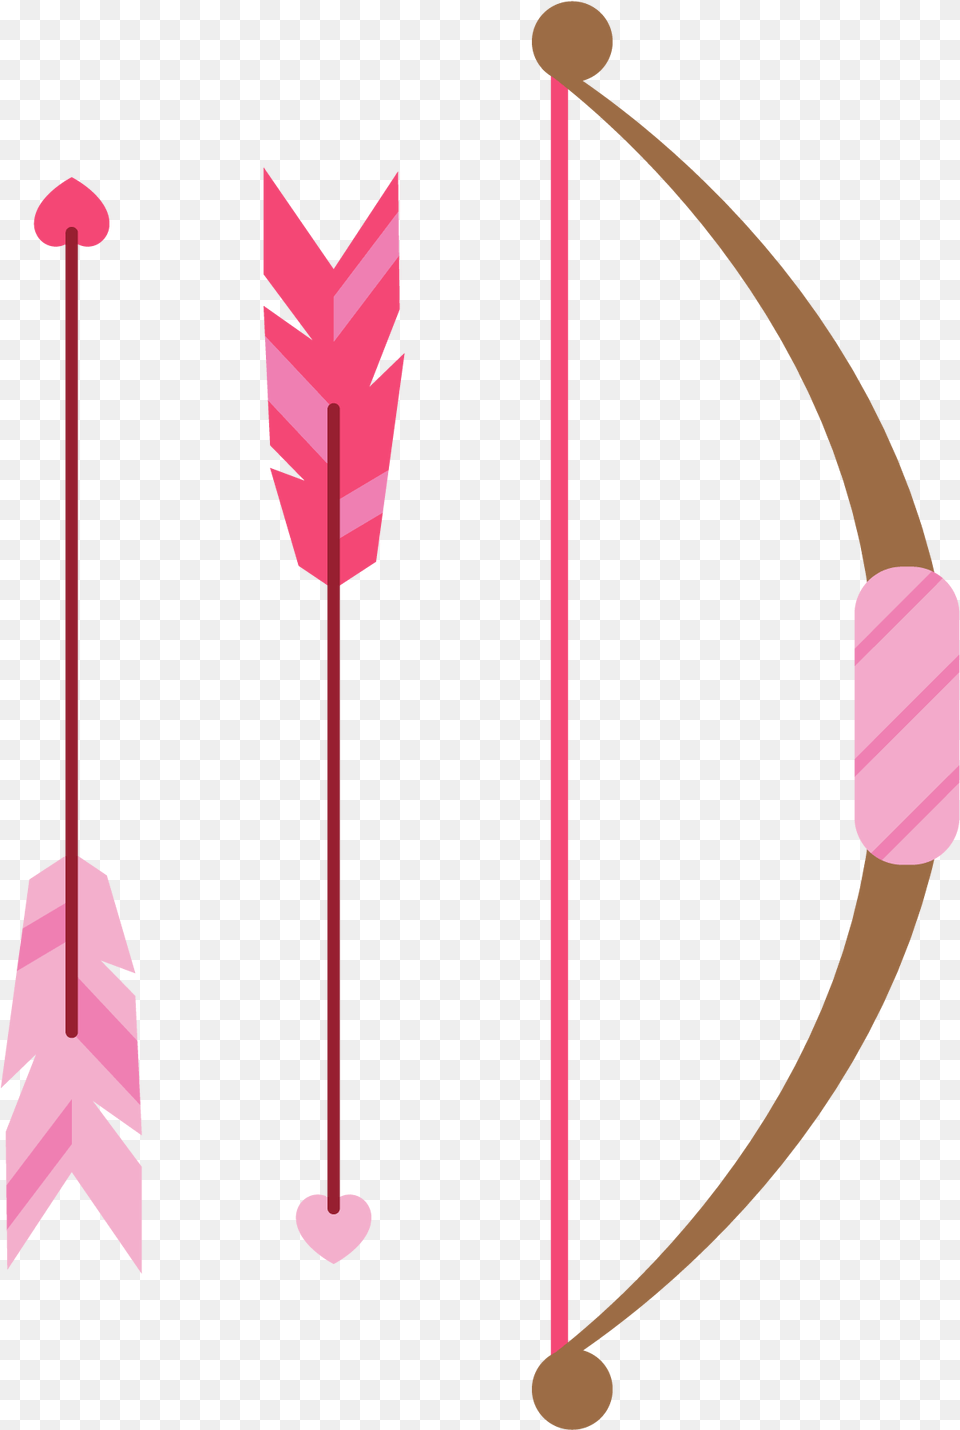 Arrow Feather Clip Art Arrow Feather Clipart Pink Feather Arrow, Bow, Weapon Free Png Download